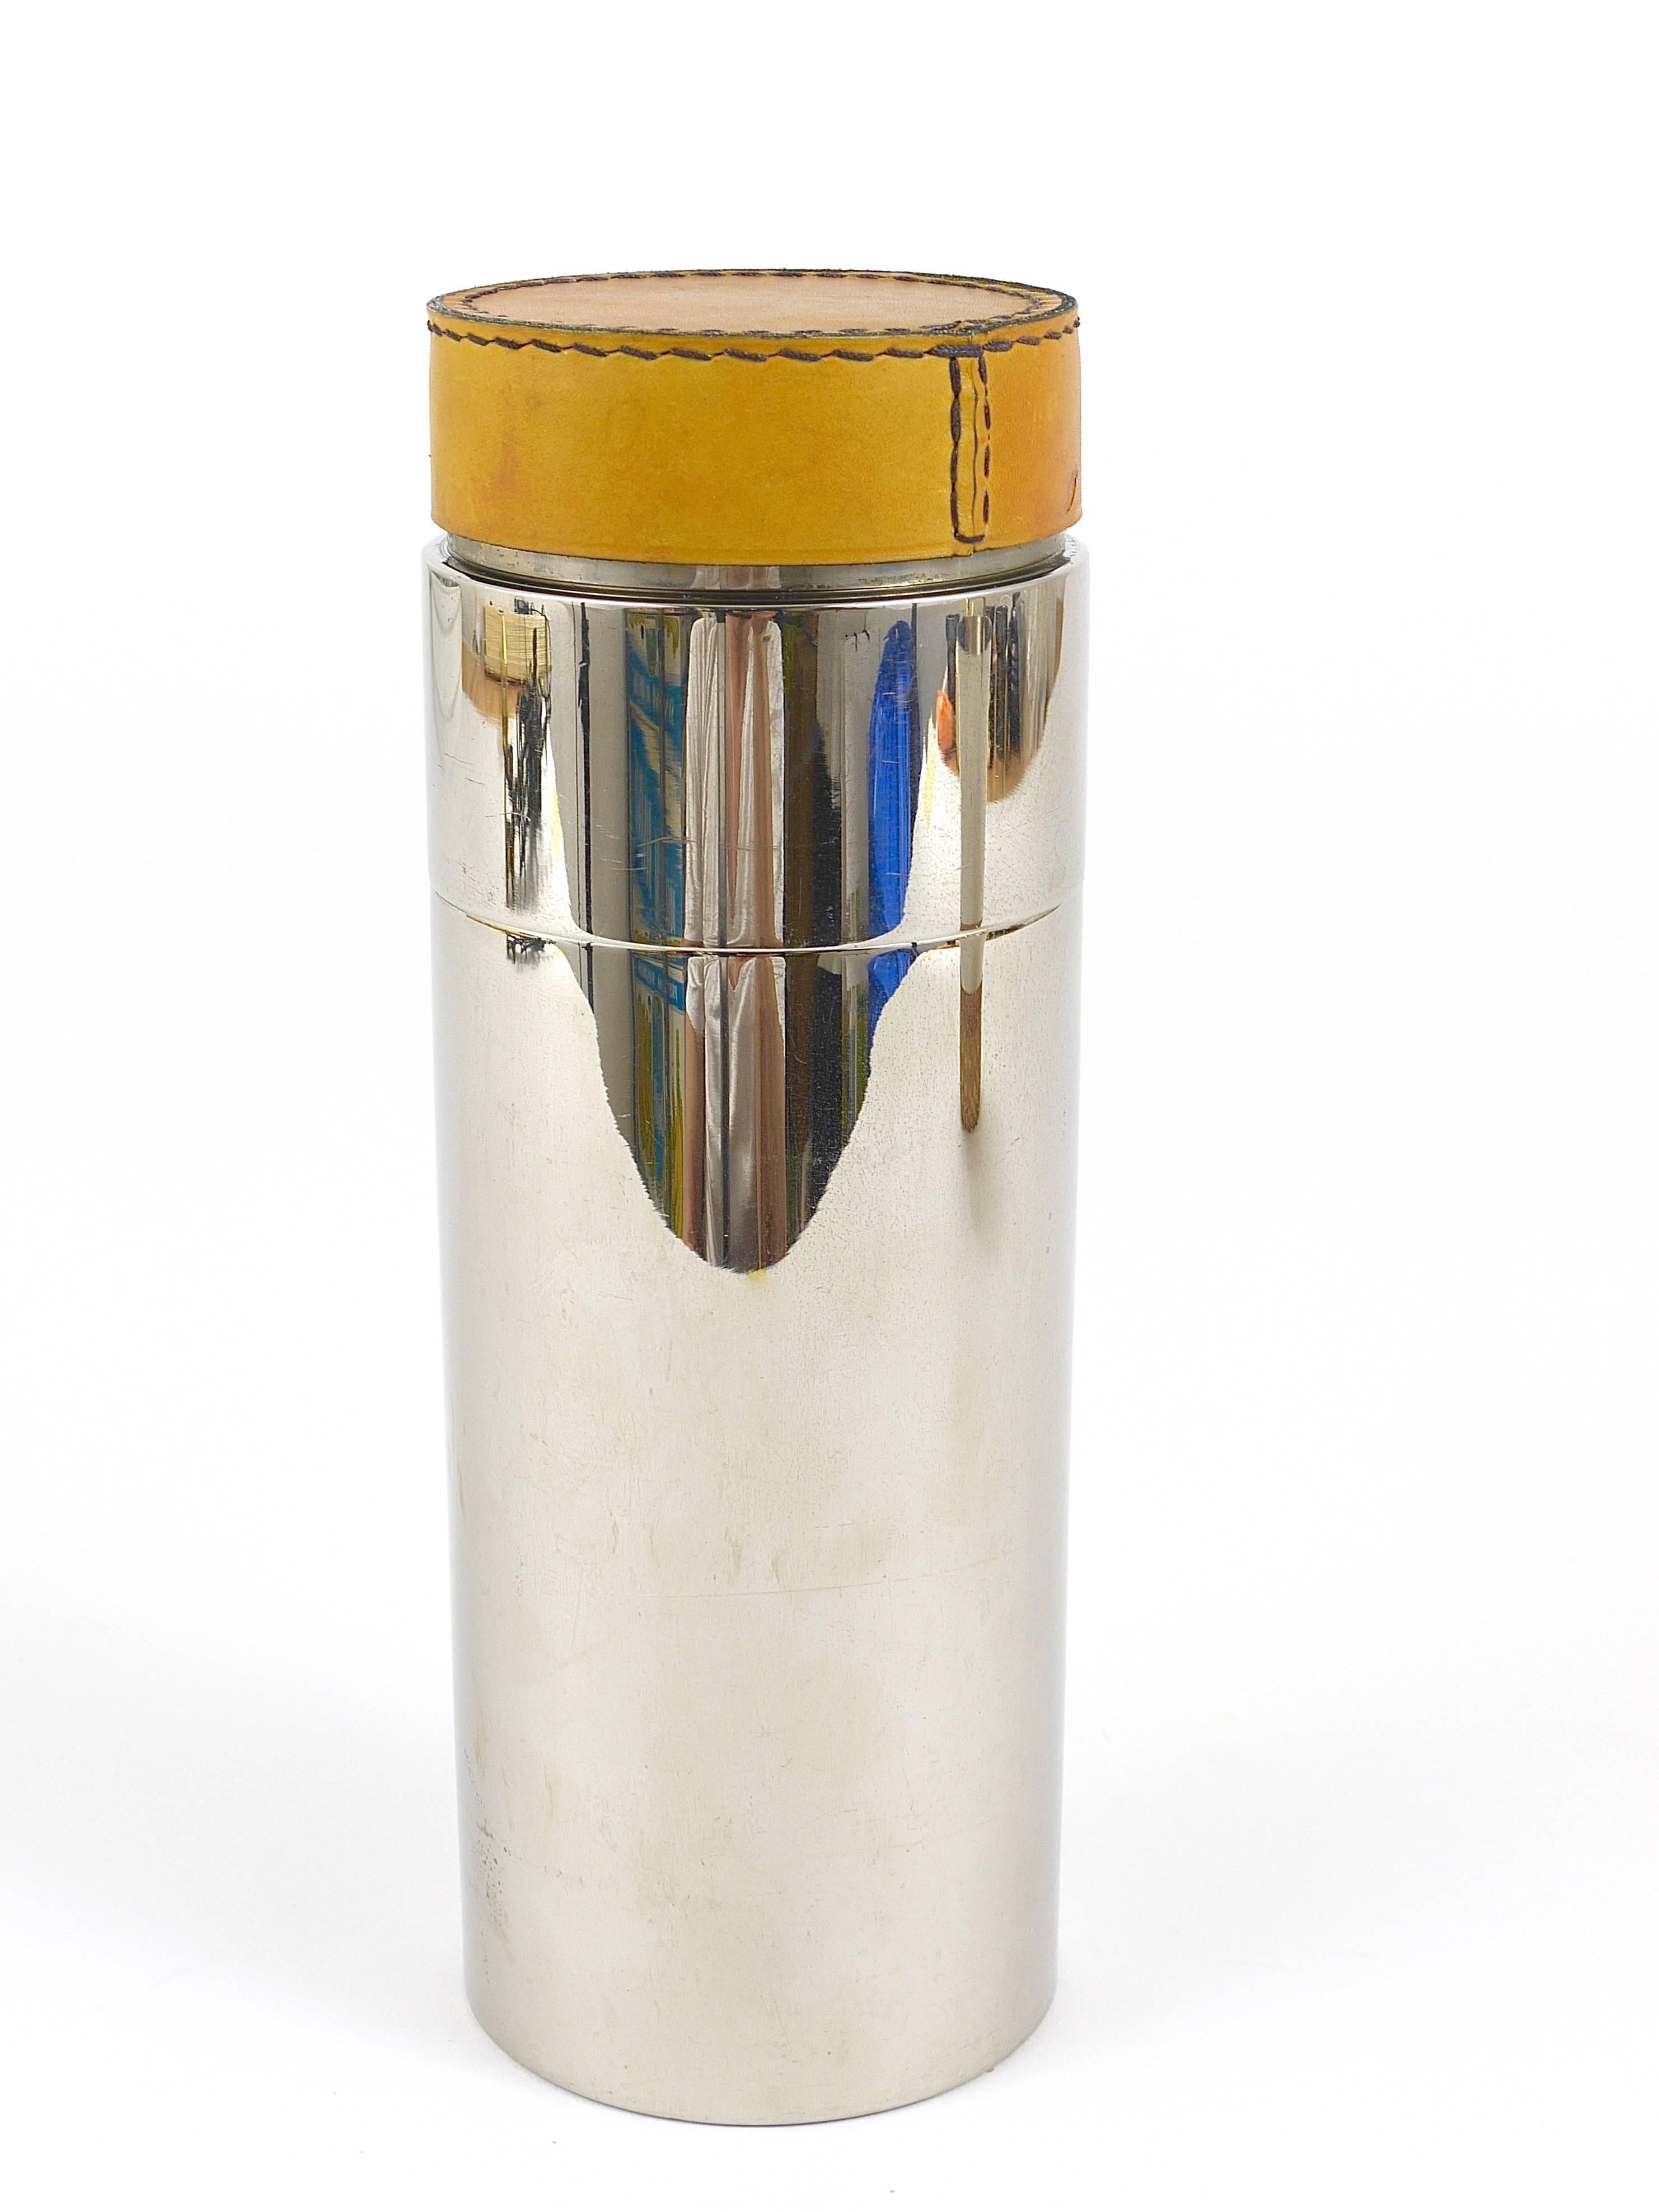 Carl Auböck Nickel-Plated Cocktail Shaker, Brass, Leather, Austria, 1950s 6